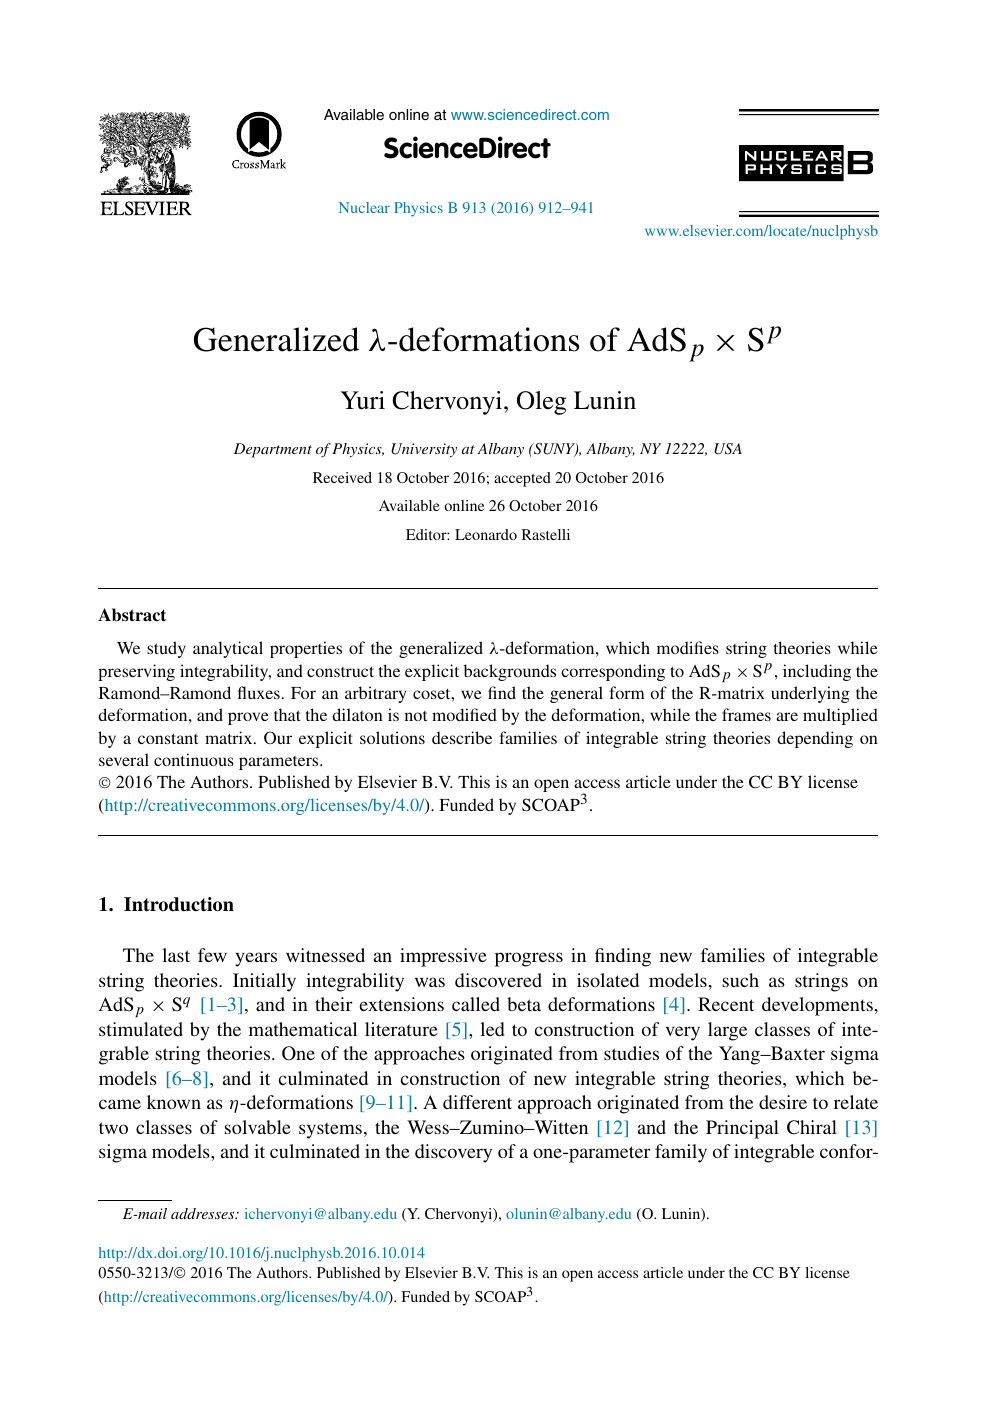 Generalized L Deformations Of Adsp Sp Topic Of Research Paper In Physical Sciences Download Scholarly Article Pdf And Read For Free On Cyberleninka Open Science Hub